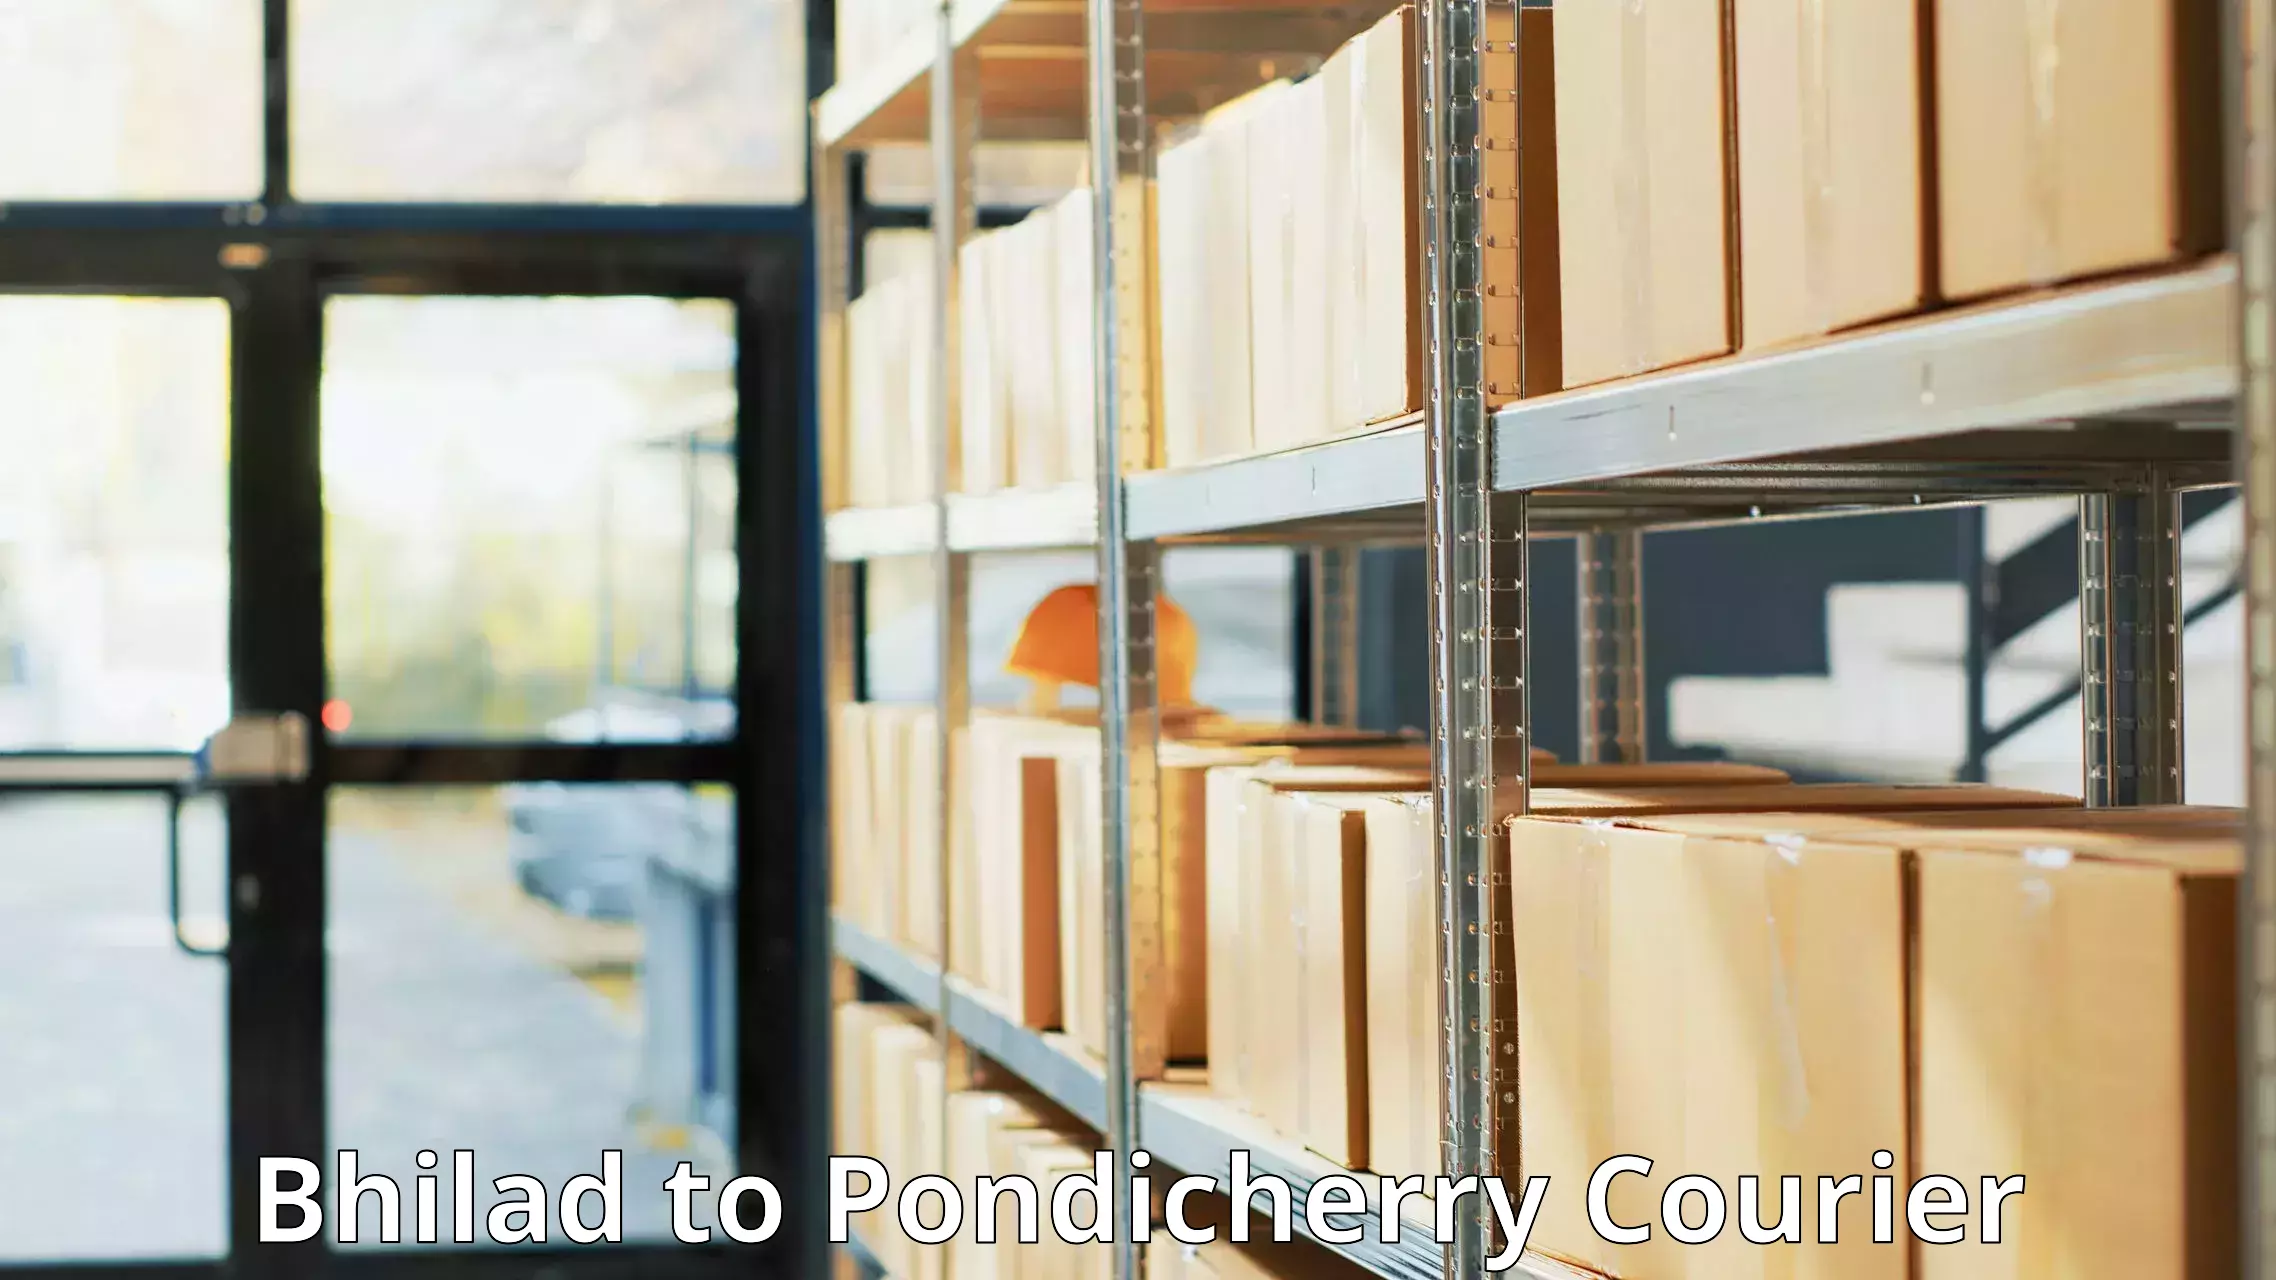 On-call courier service Bhilad to Pondicherry University